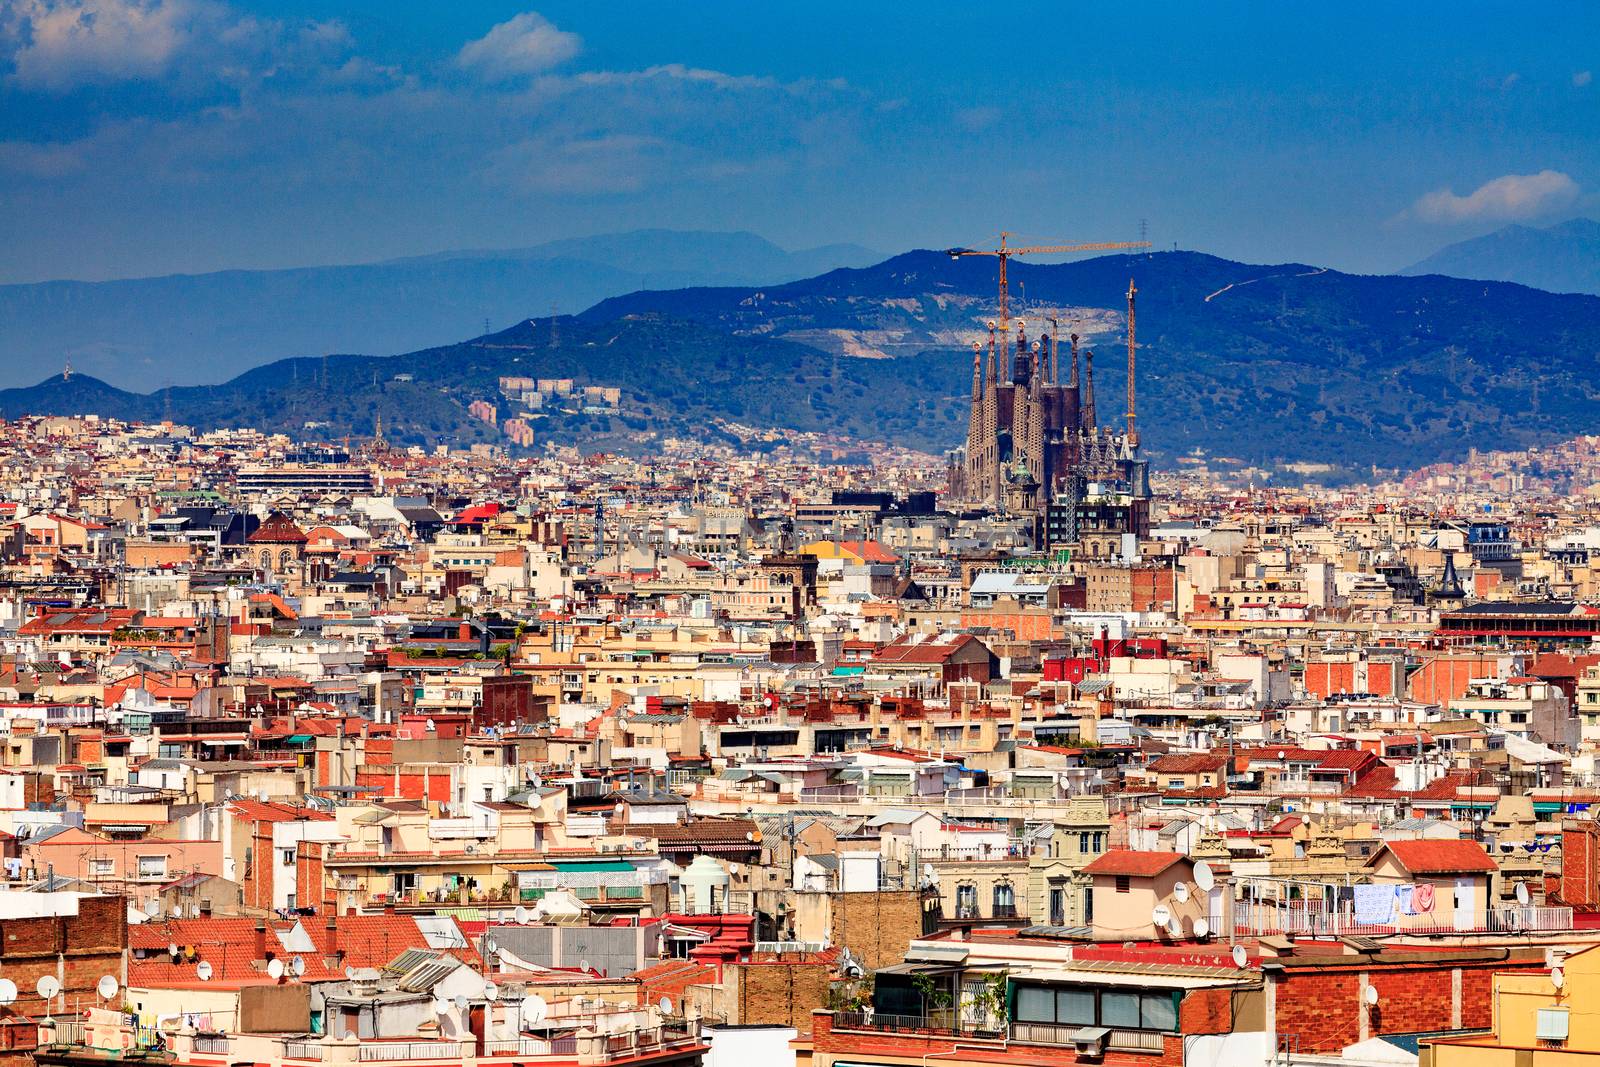 Panoramic view of the city of Barcelona, Spain by Nobilior